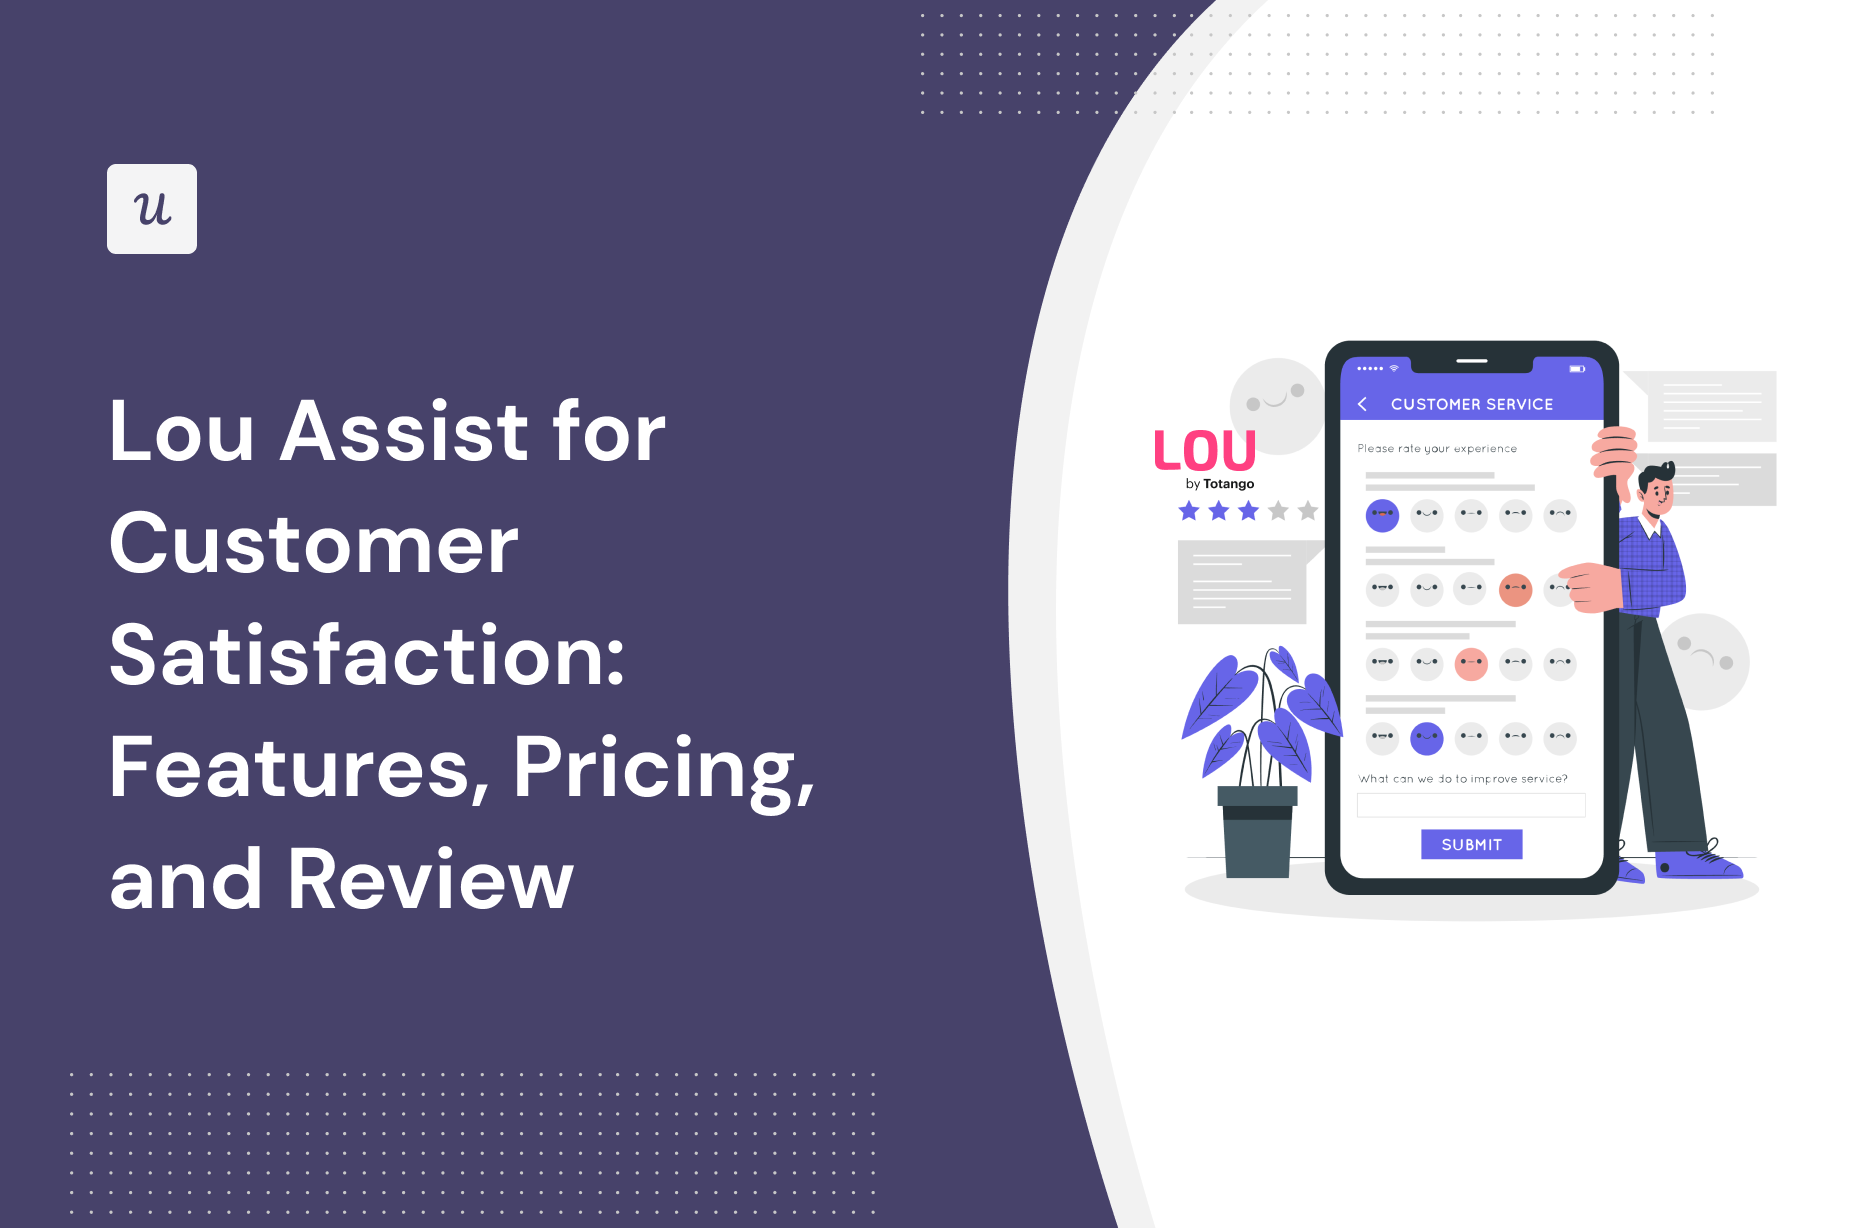 Lou Assist for Customer Satisfaction: Features, Pricing, and Review